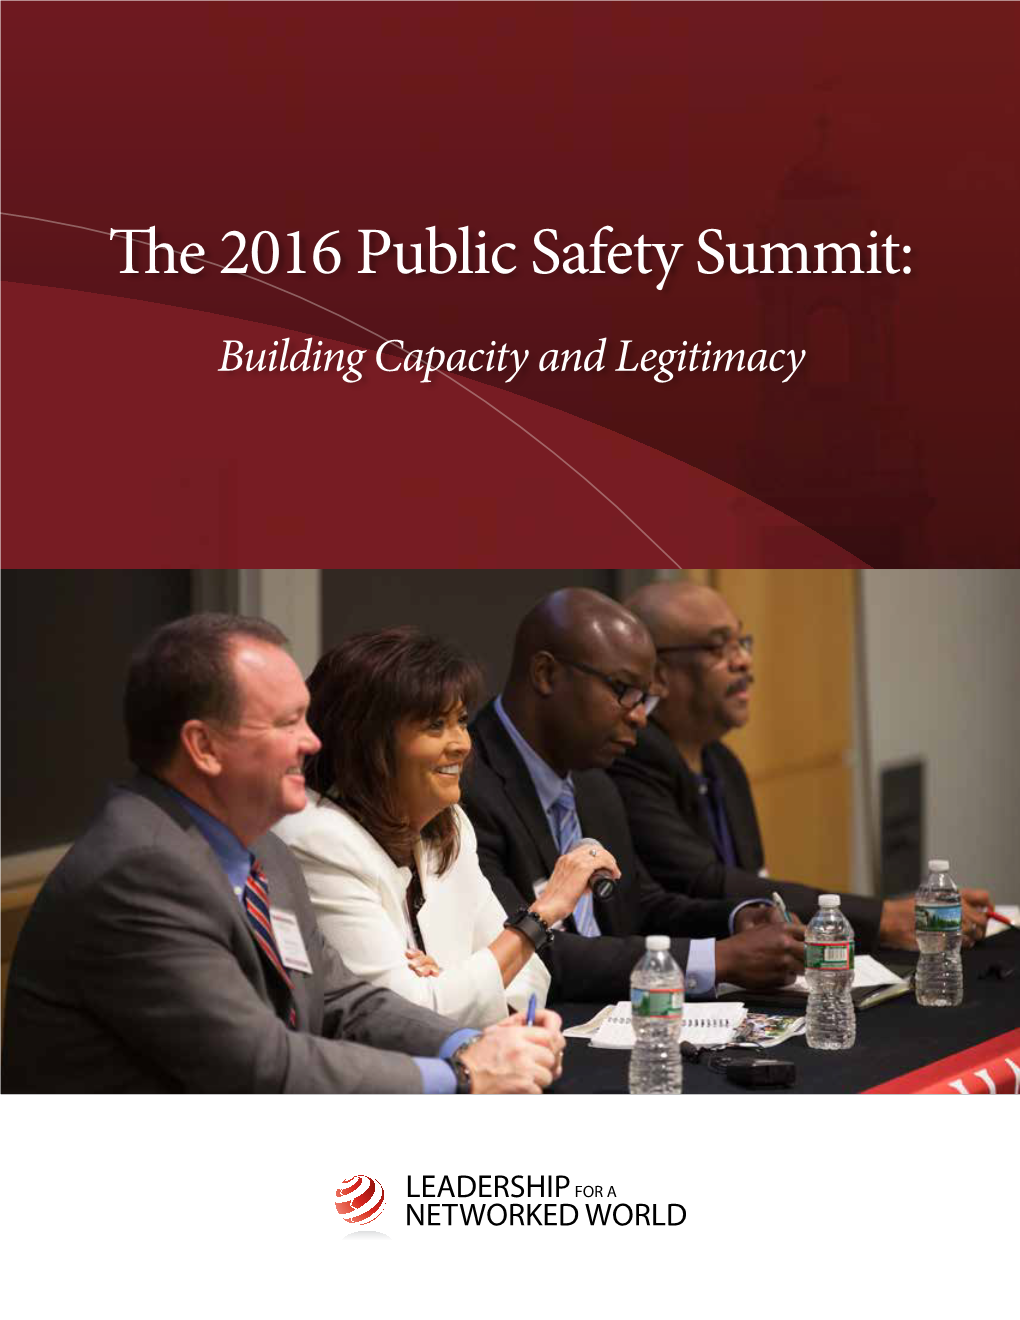 The 2016 Public Safety Summit: Building Capacity and Legitimacy the 2016 Public Safety Summit: Building Capacity and Legitimacy